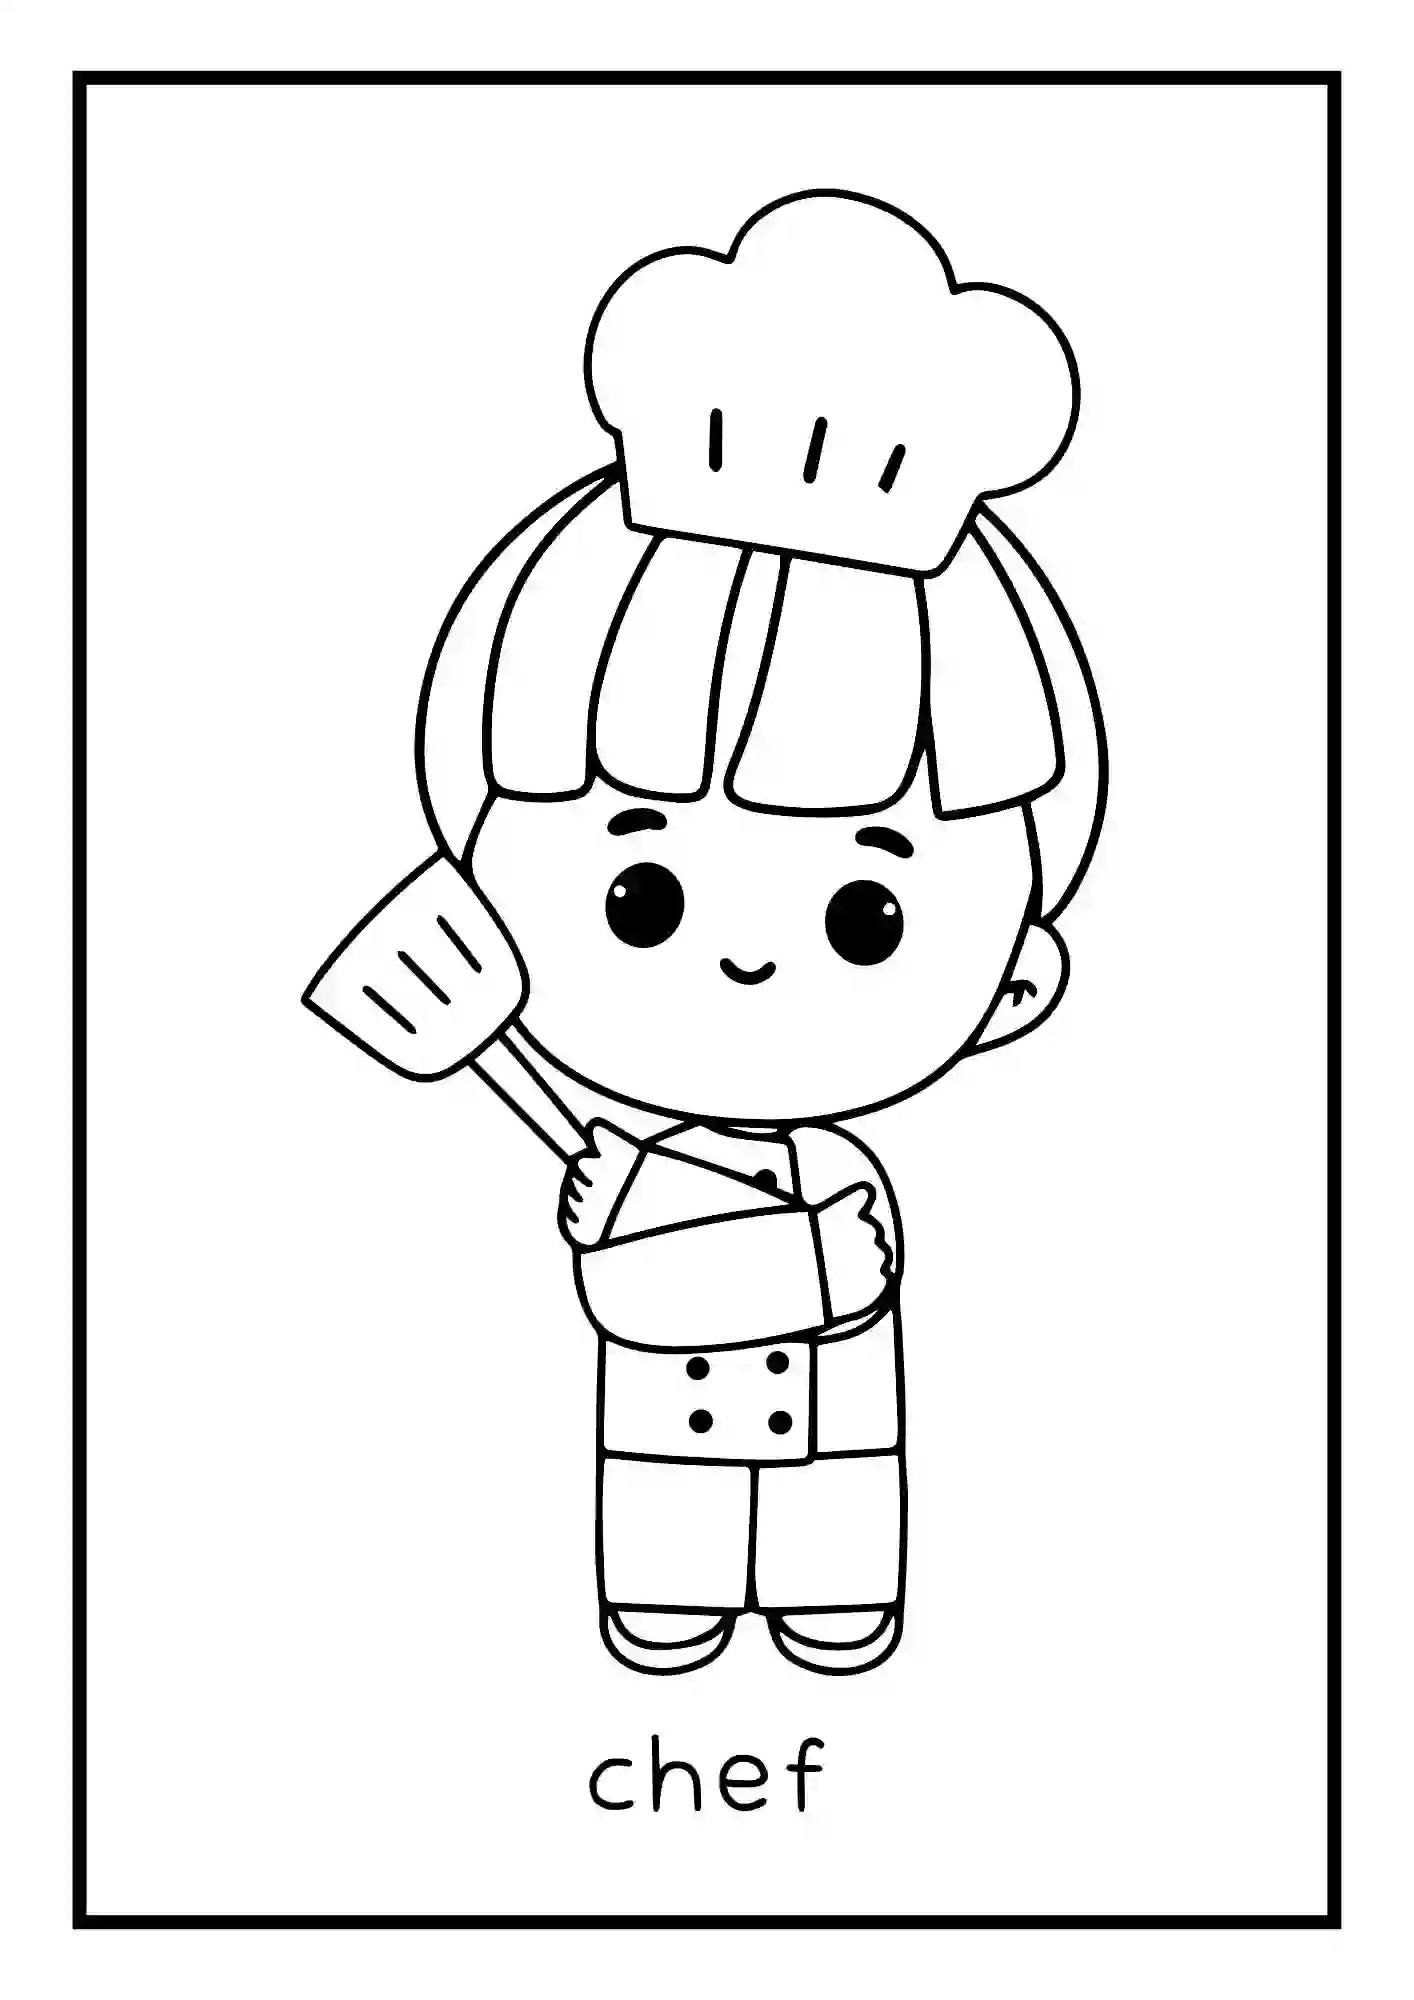 Different Professions, occupations, carriers, jobs, Coloring Worksheets (chef)